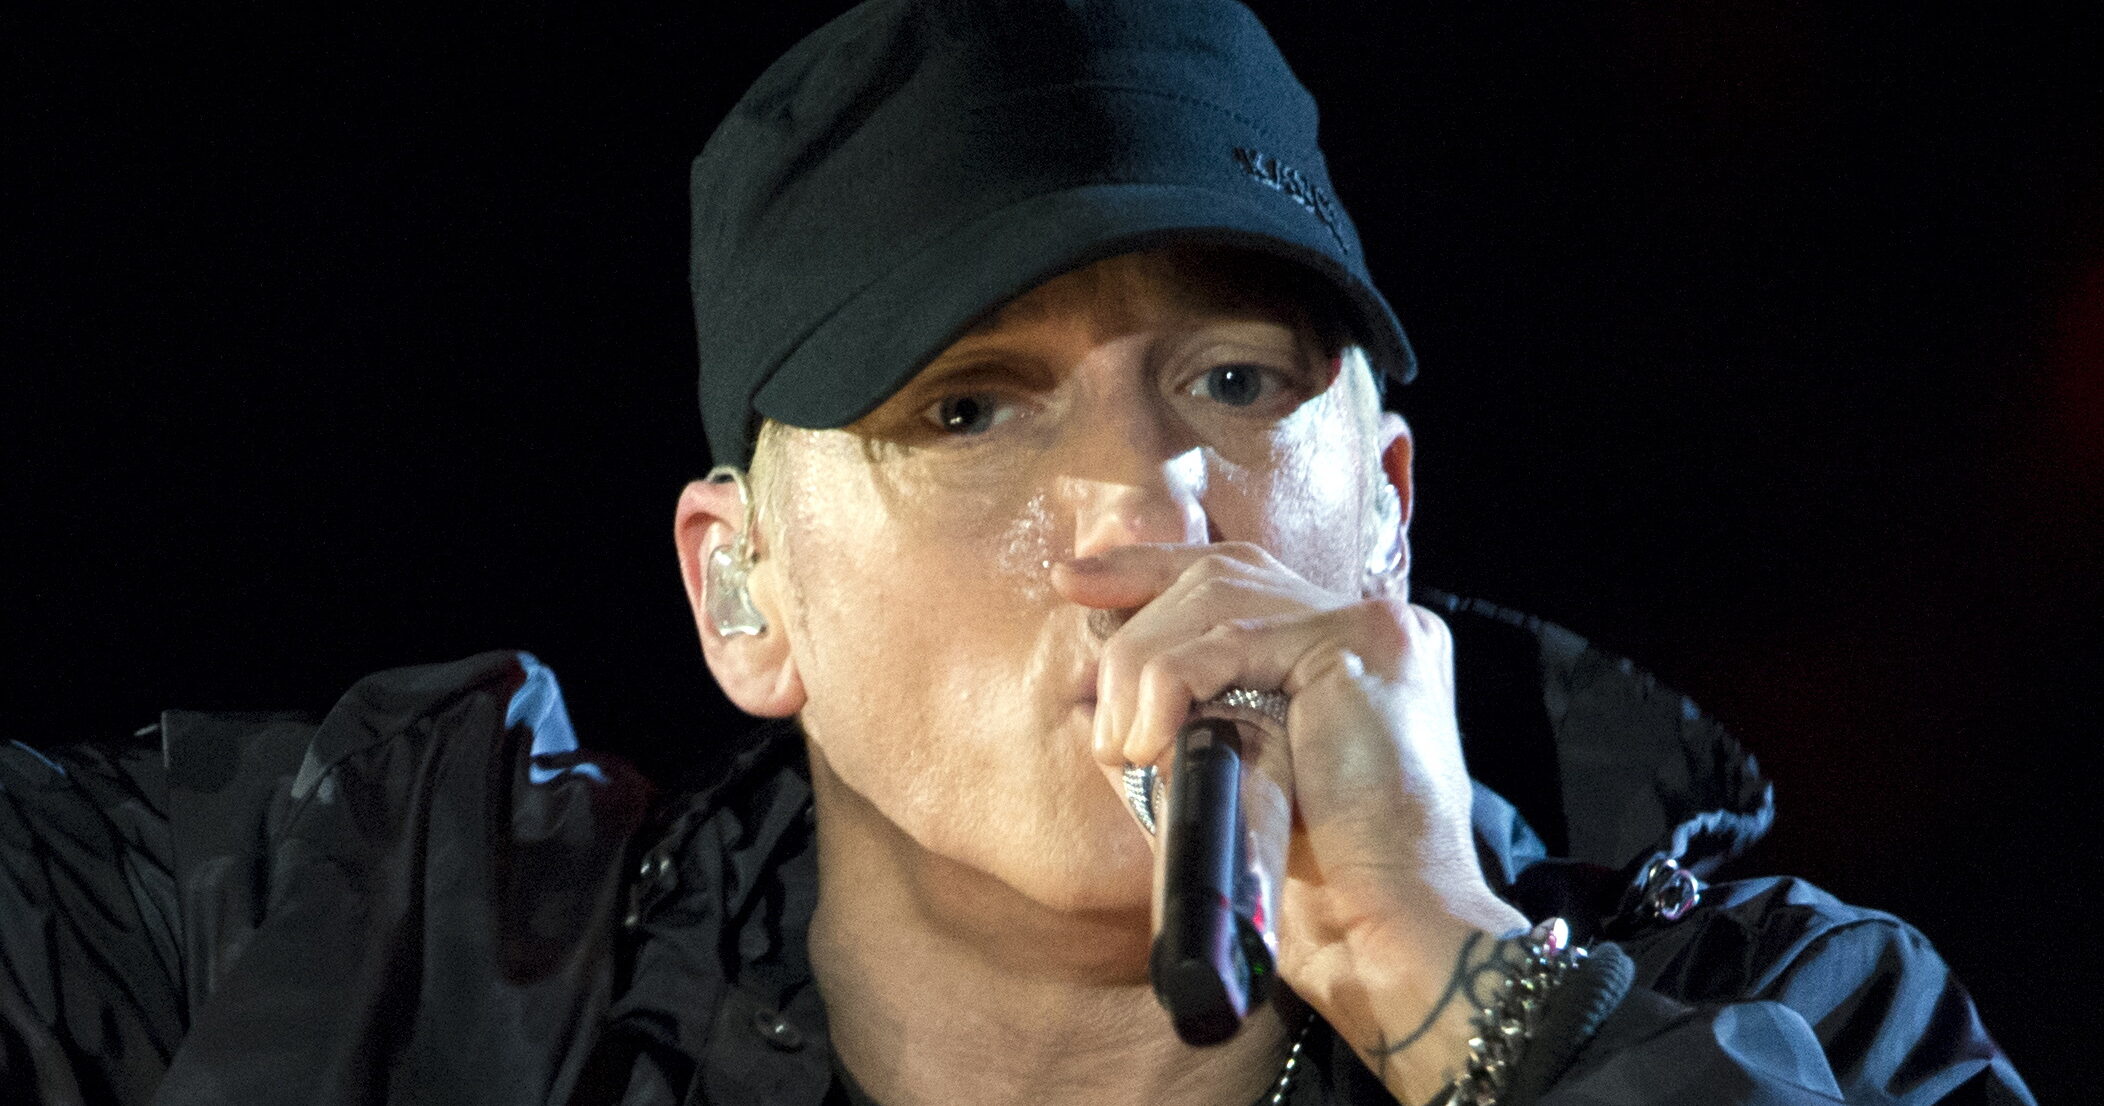 Eminem and Linkin Park Meet on “Lose Yourself” Cover